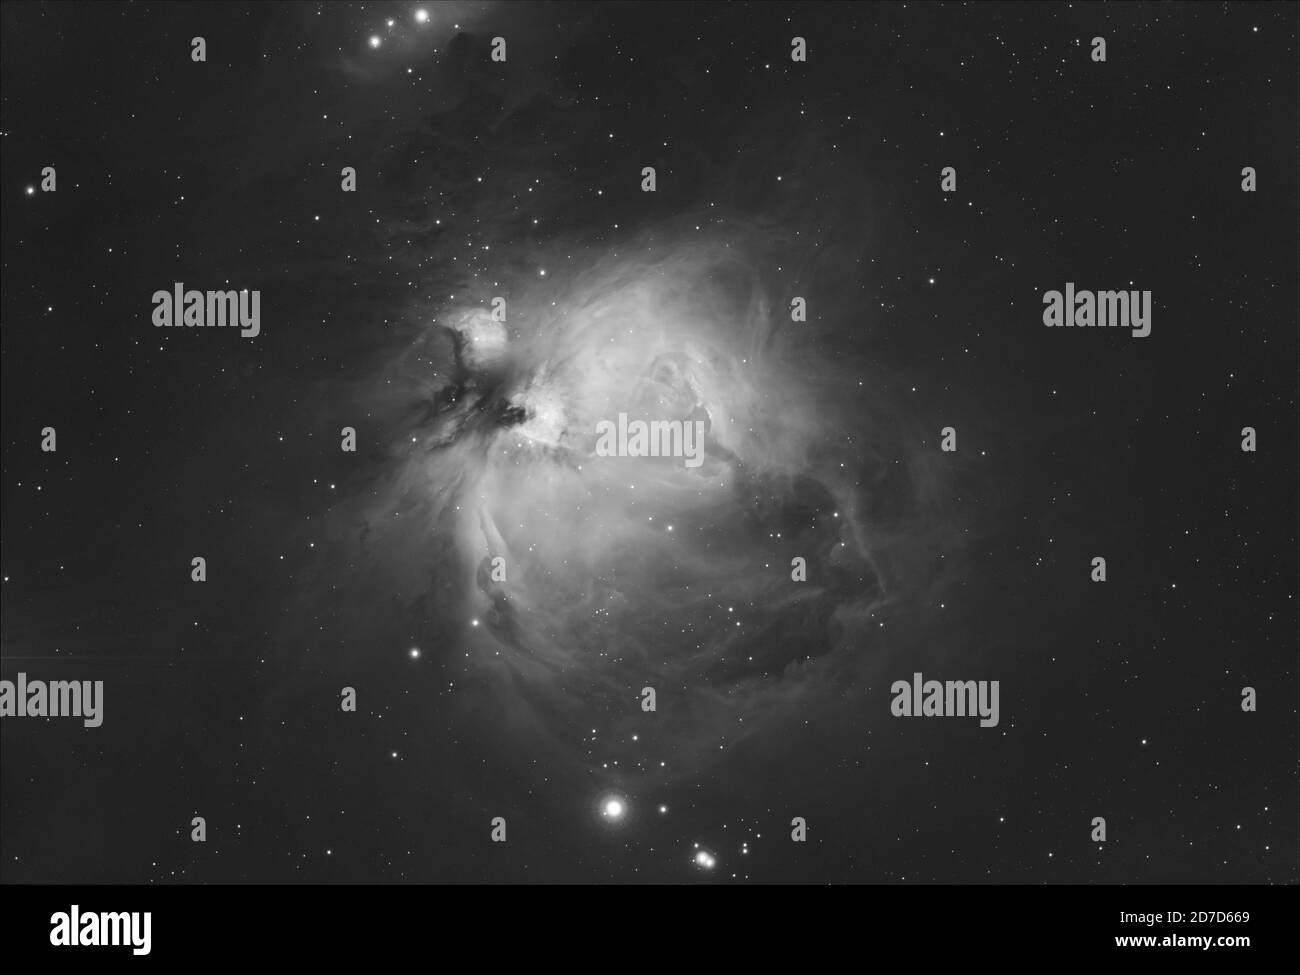 London, UK. 22 October 2020. Clear early morning sky over London allows photographer to take detailed monochrome image of the Orion Nebula using a narrowband filter to pick up Hydrogen emission region of this vast gas cloud 1344 light years from Earth. Exposure time 1 hour taken with a monochrome astrophotography camera cooled to -15 degrees. Credit: Malcolm Park/Alamy Stock Photo